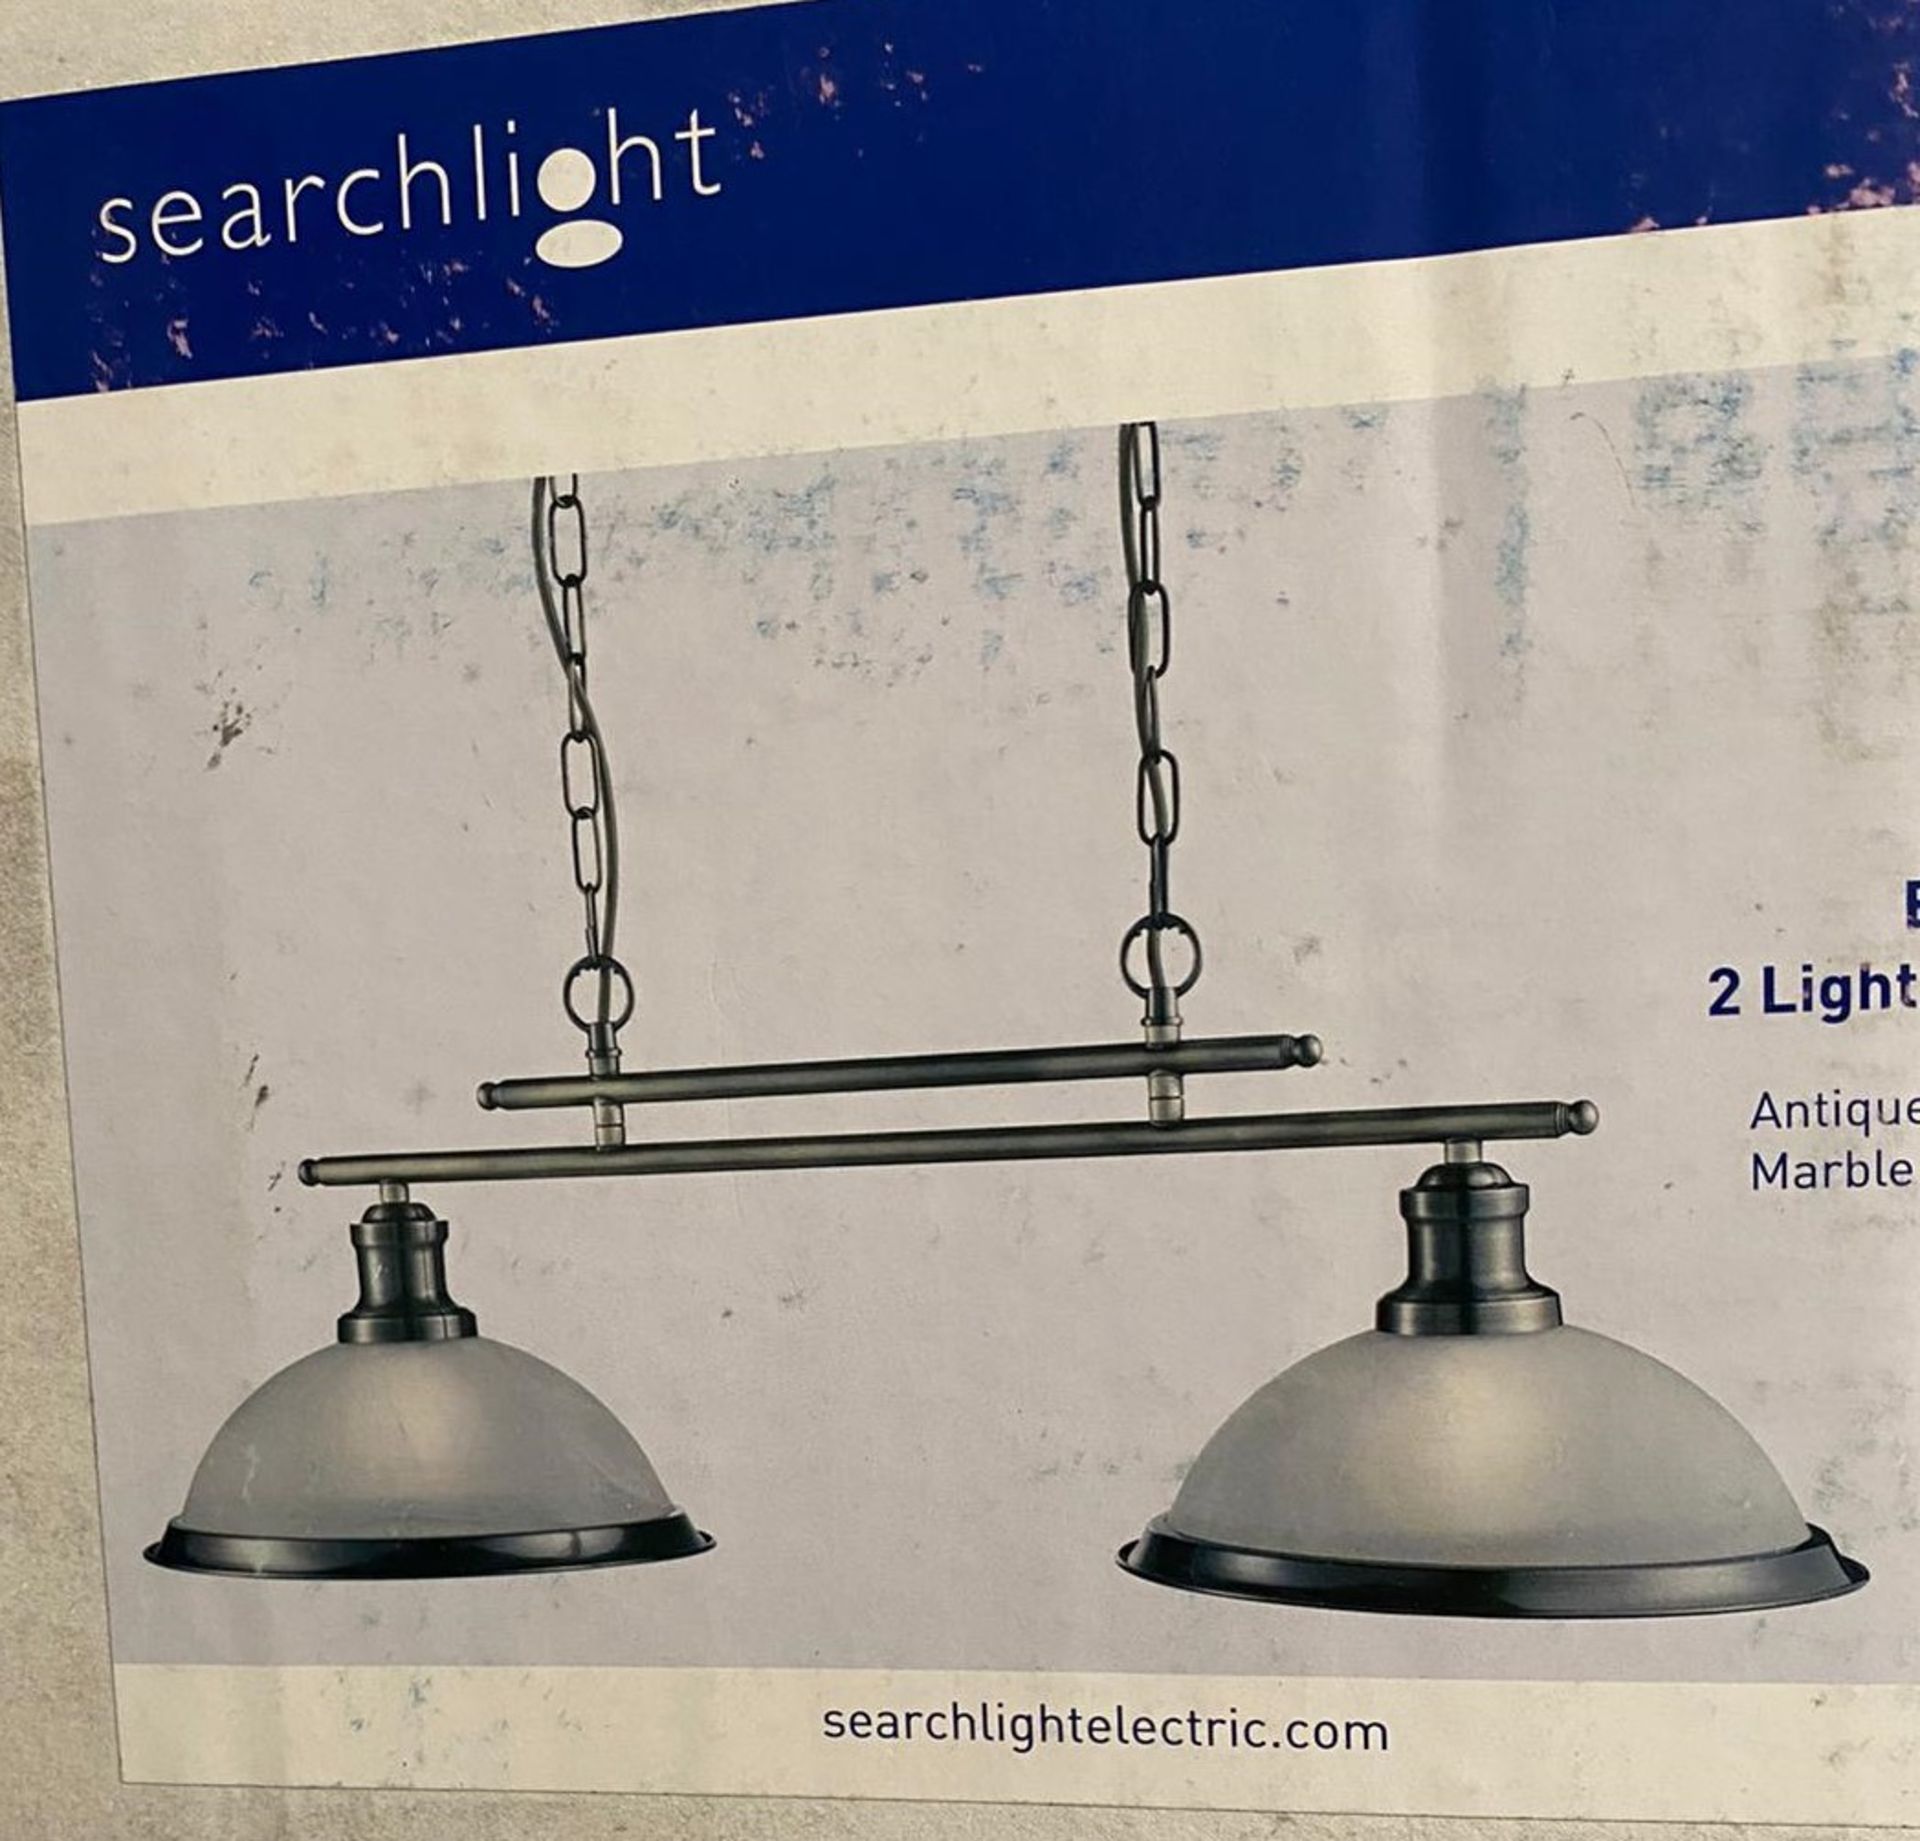 1 x Searchlight Bistro 2 Light Ceiling Bar - Ref: 2682-2AB - New and Boxed - RRP: £115.00 - Image 2 of 3